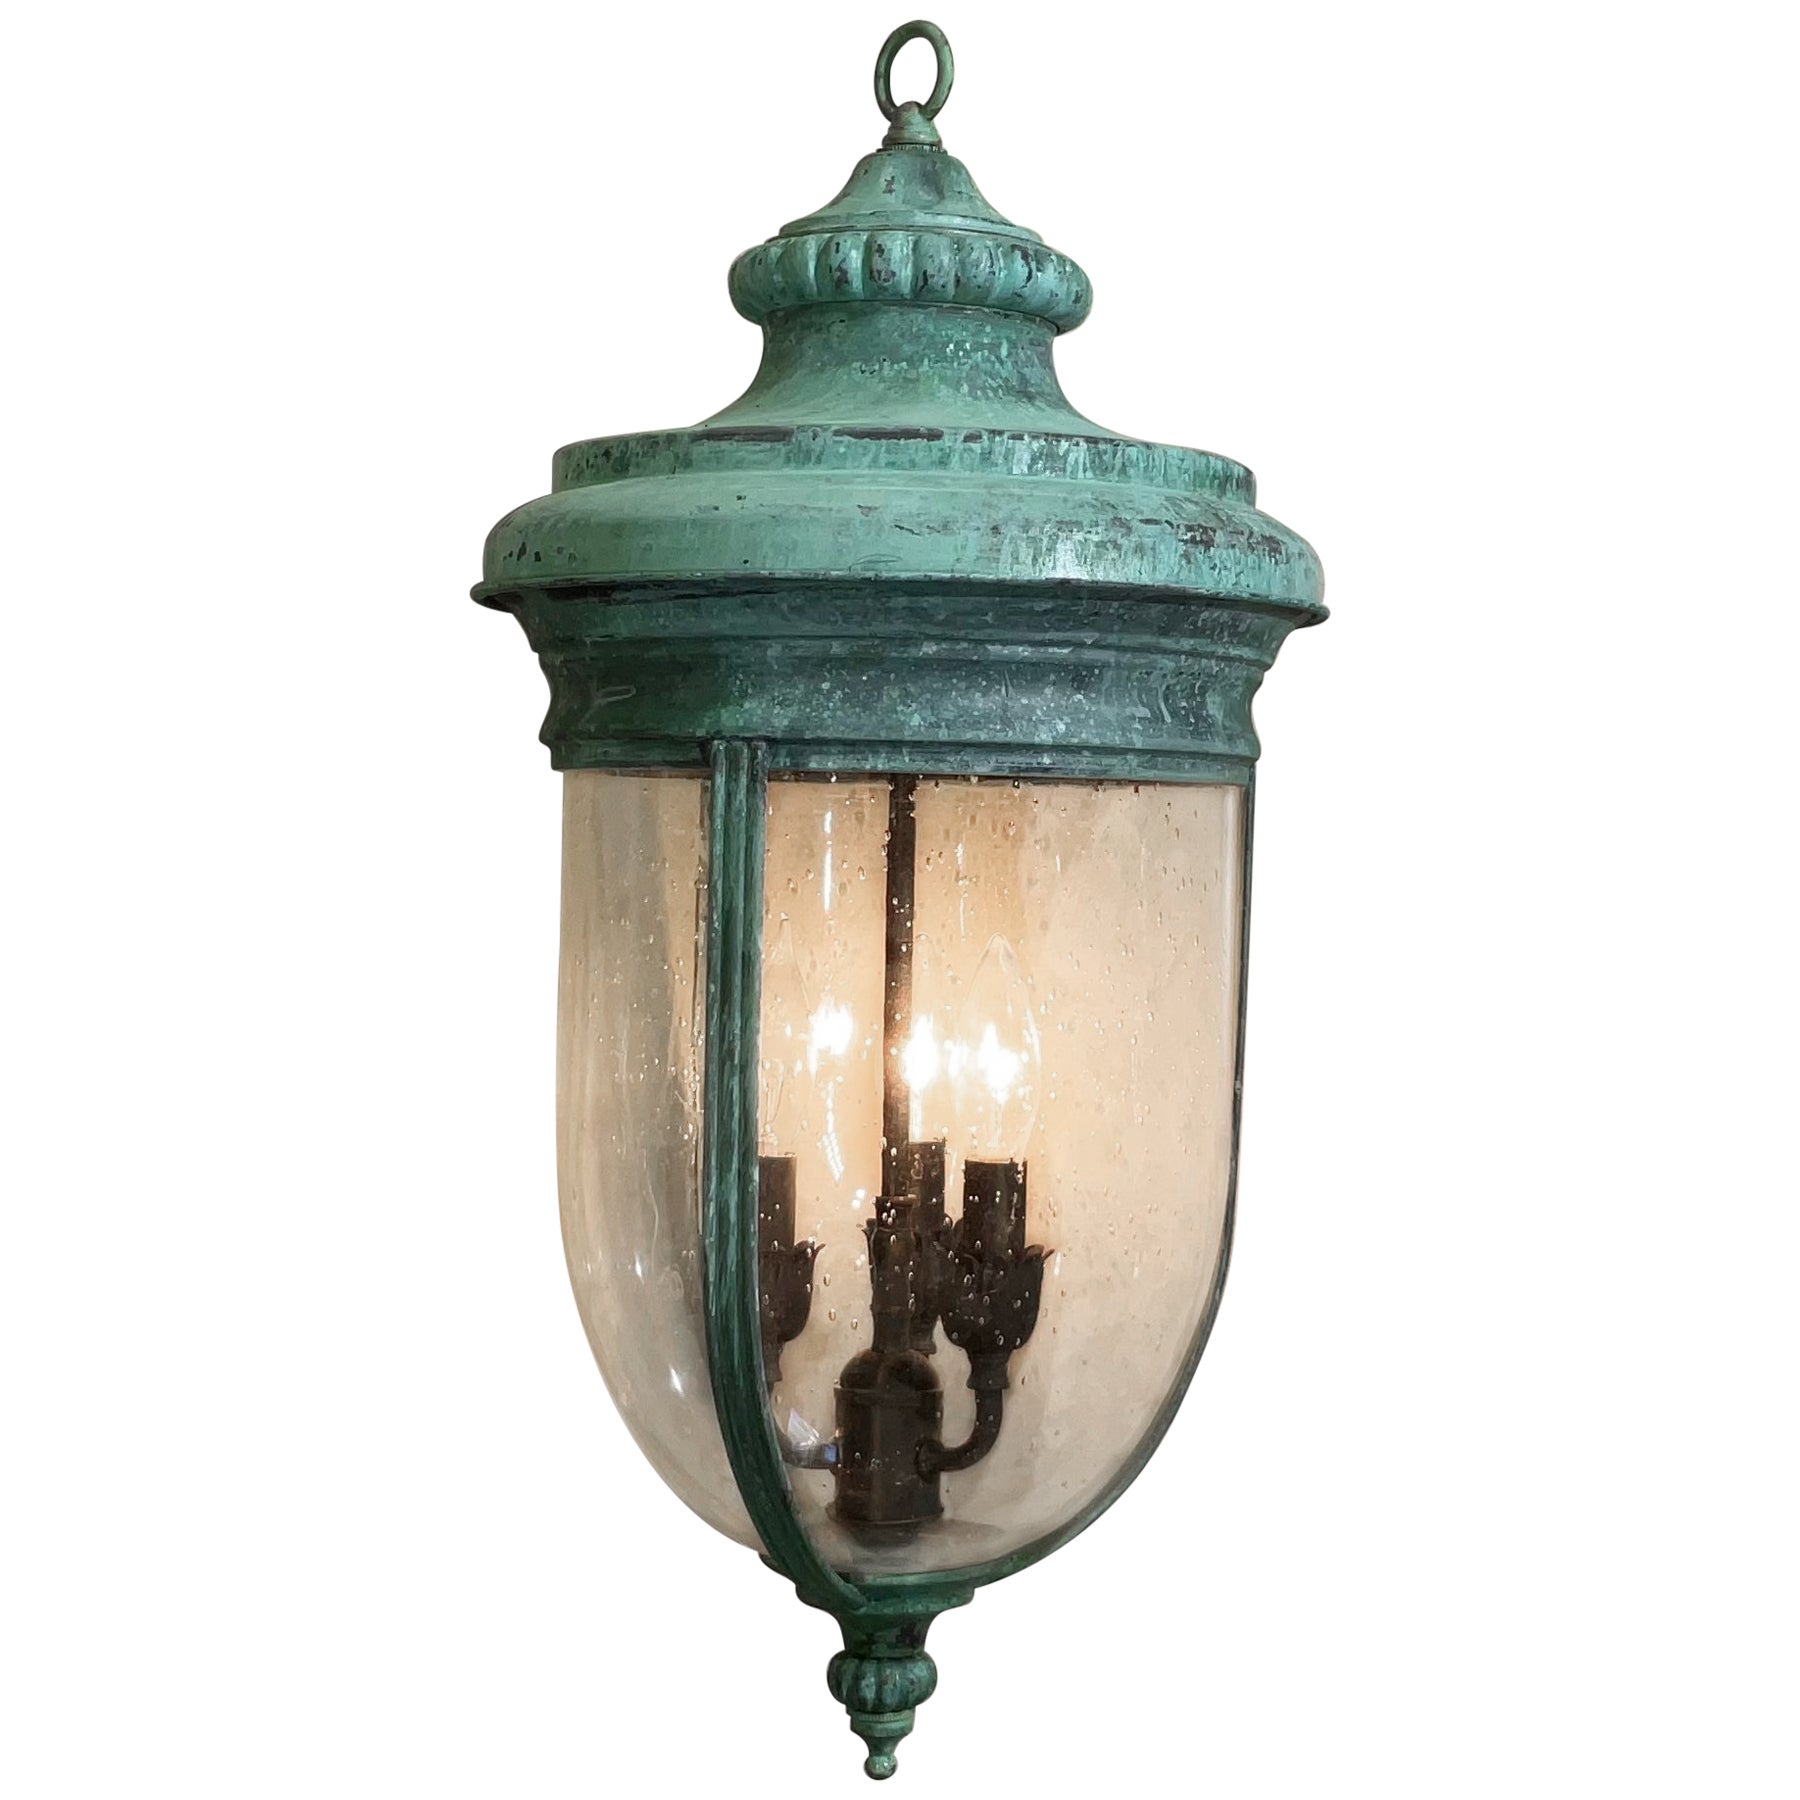 Solid Brass Lantern Hanging Pendant with Handblown Circular Glass For Sale